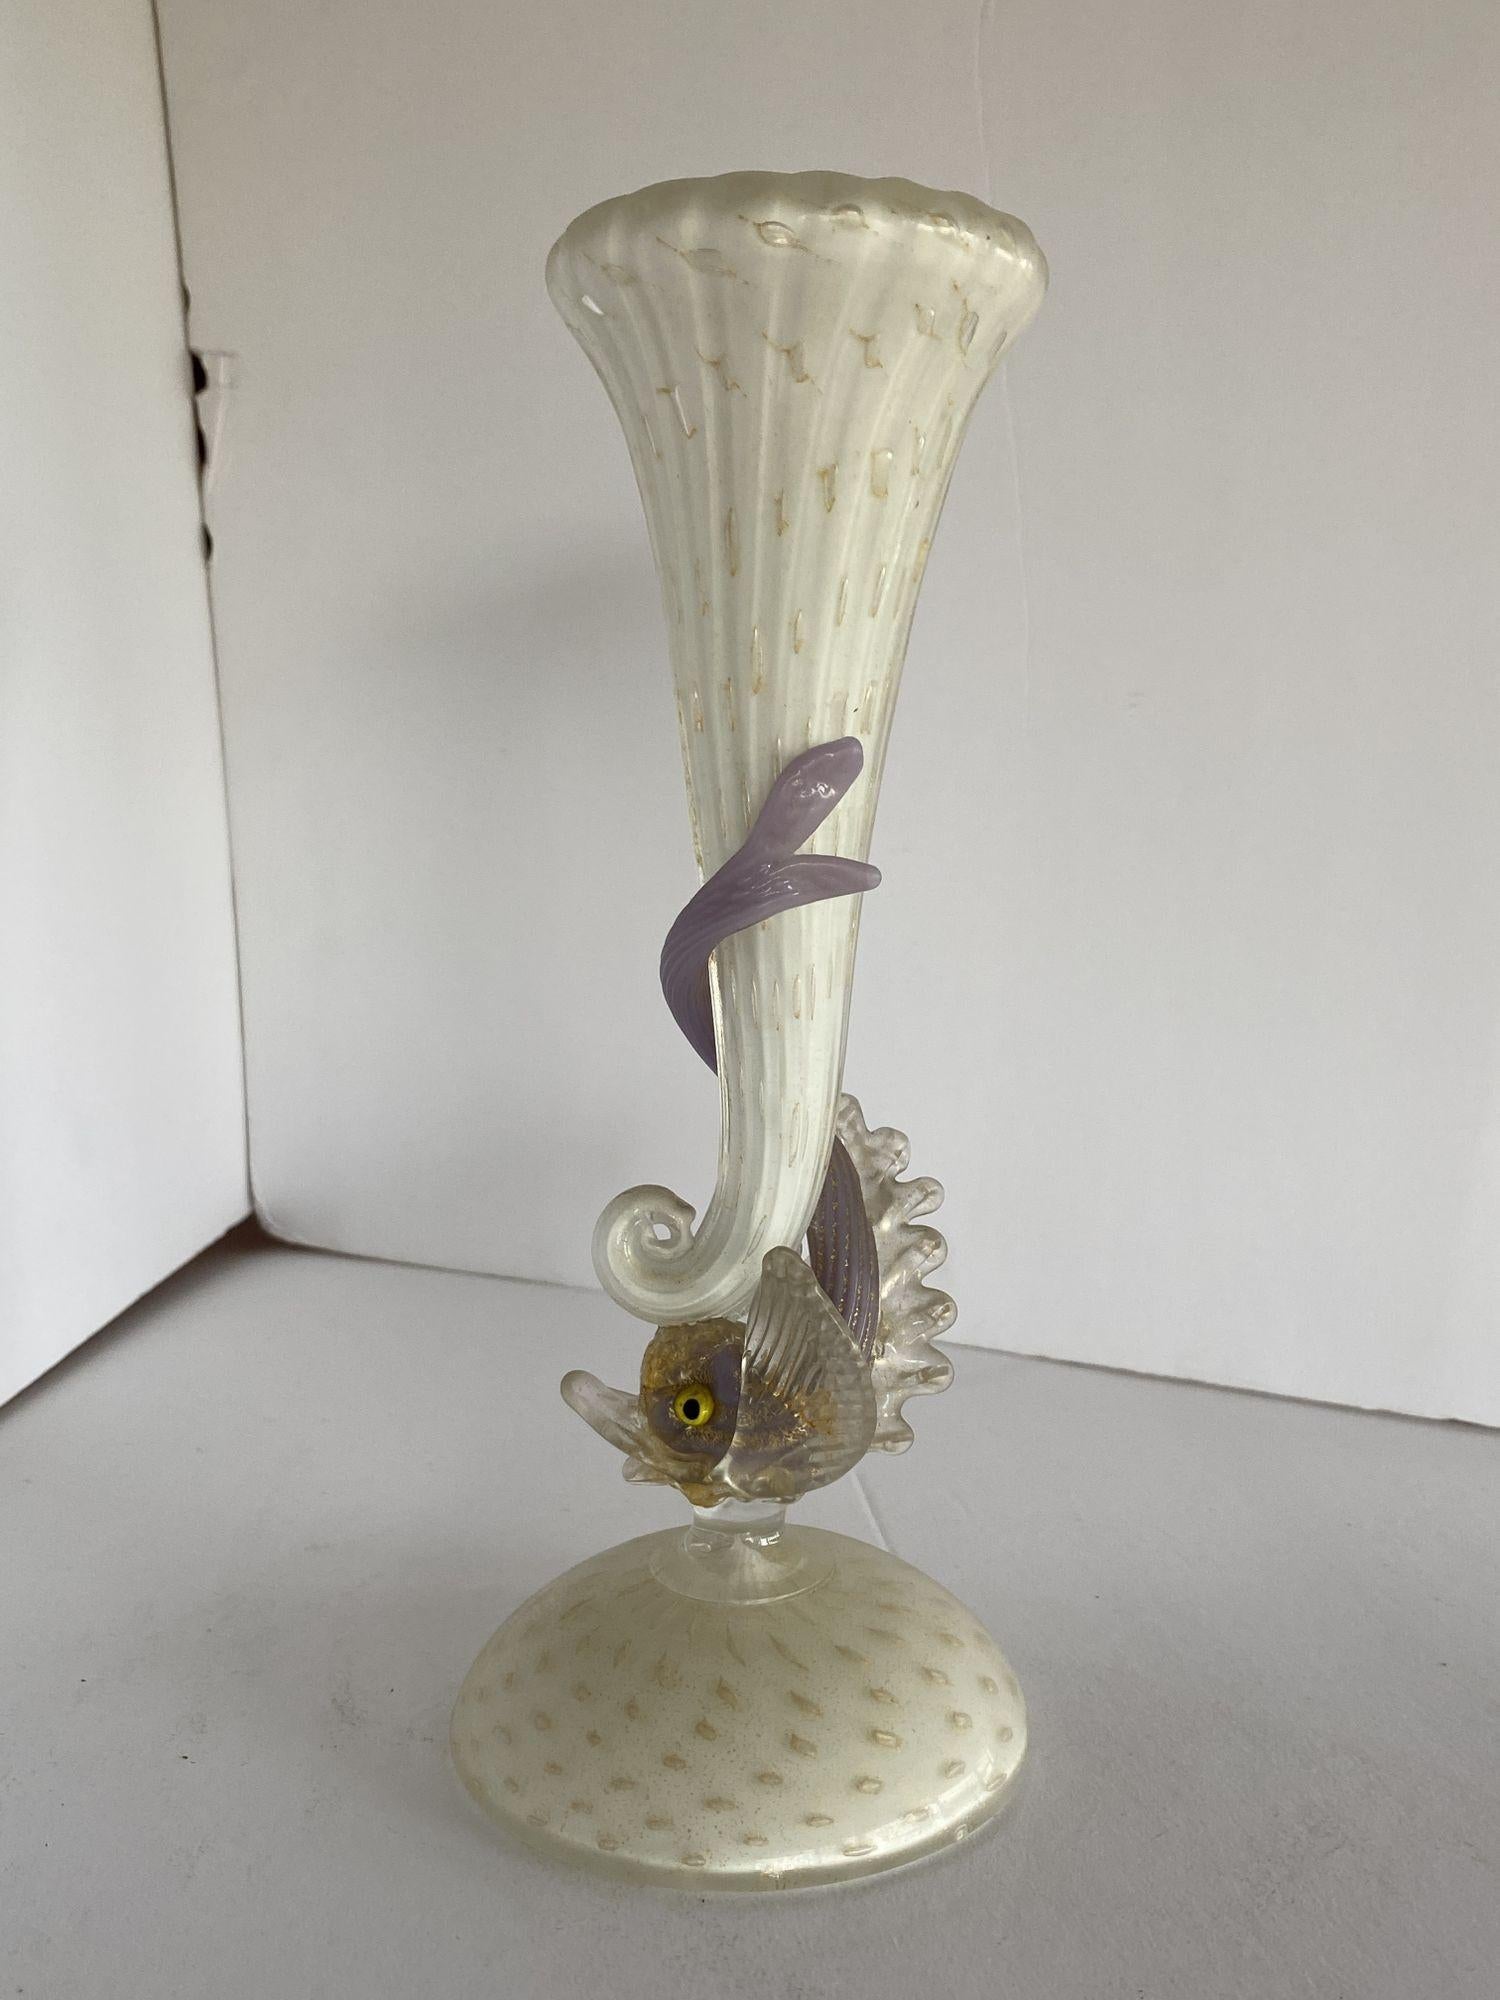 Very fragile vintage Venetian Murano Glass-handled Dolphin vase by Salviati. In very good condition with no damage. Measures approximately 10 inches tall.
 
Unsigned